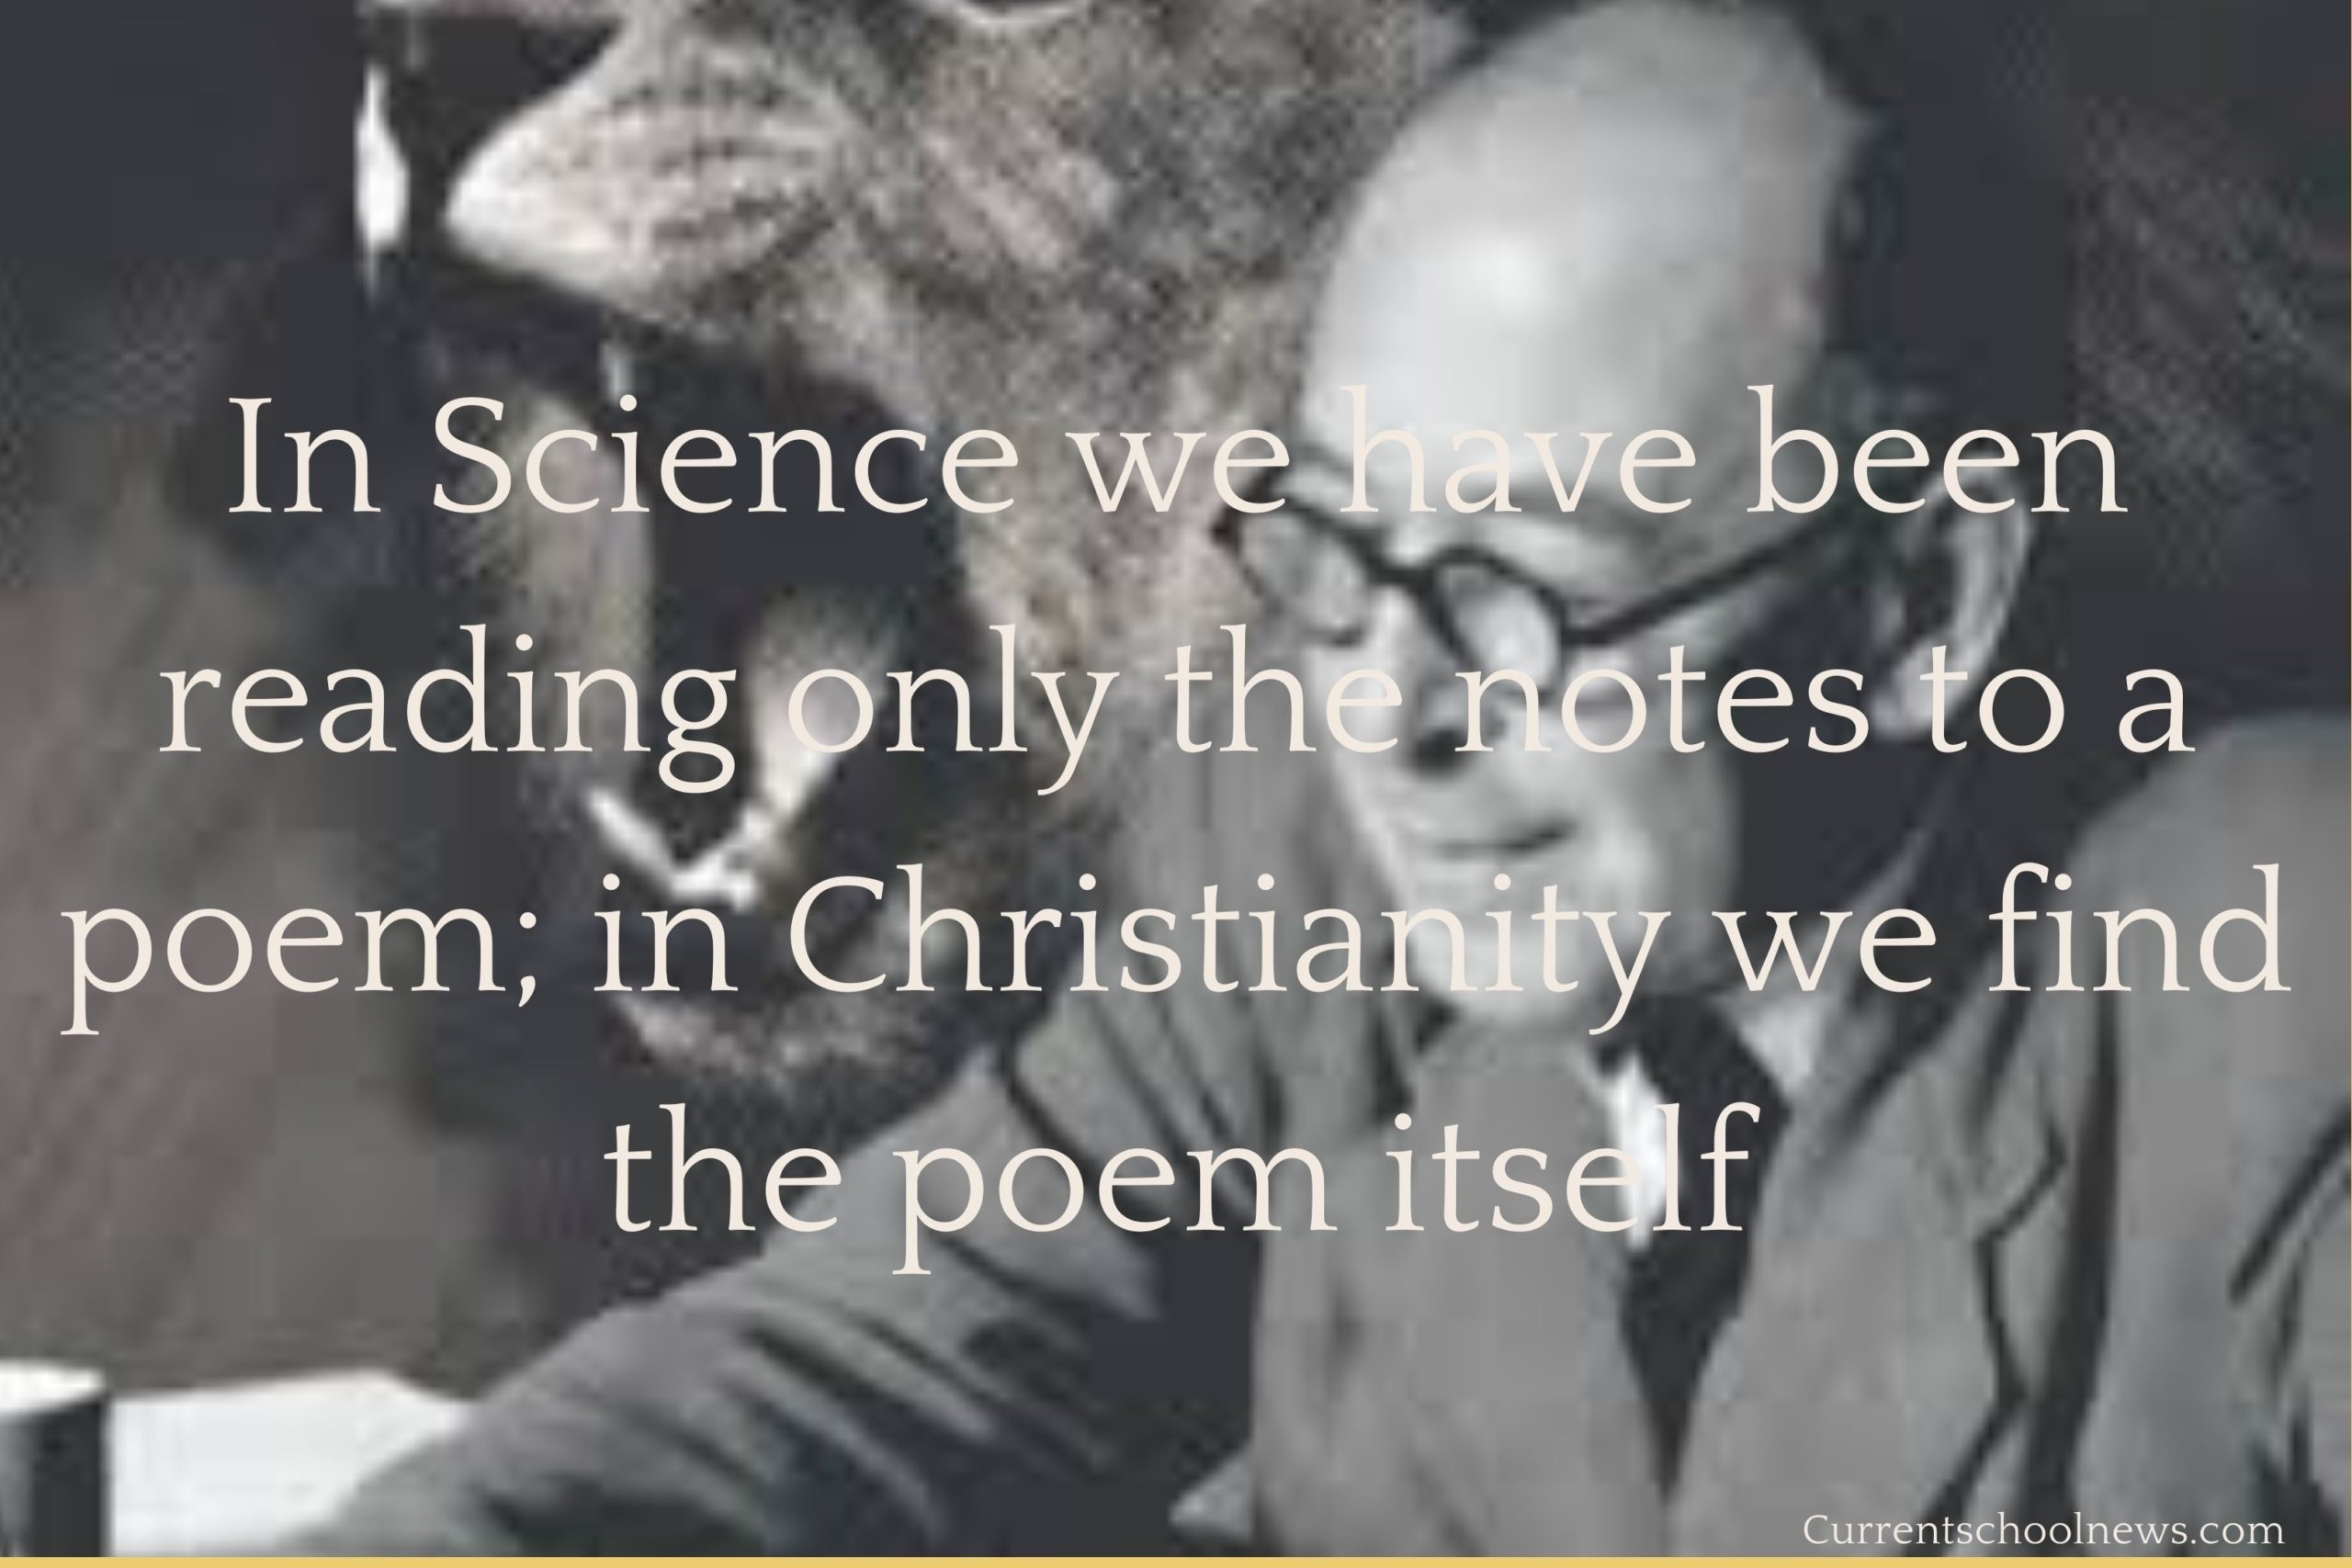 Christianity over science